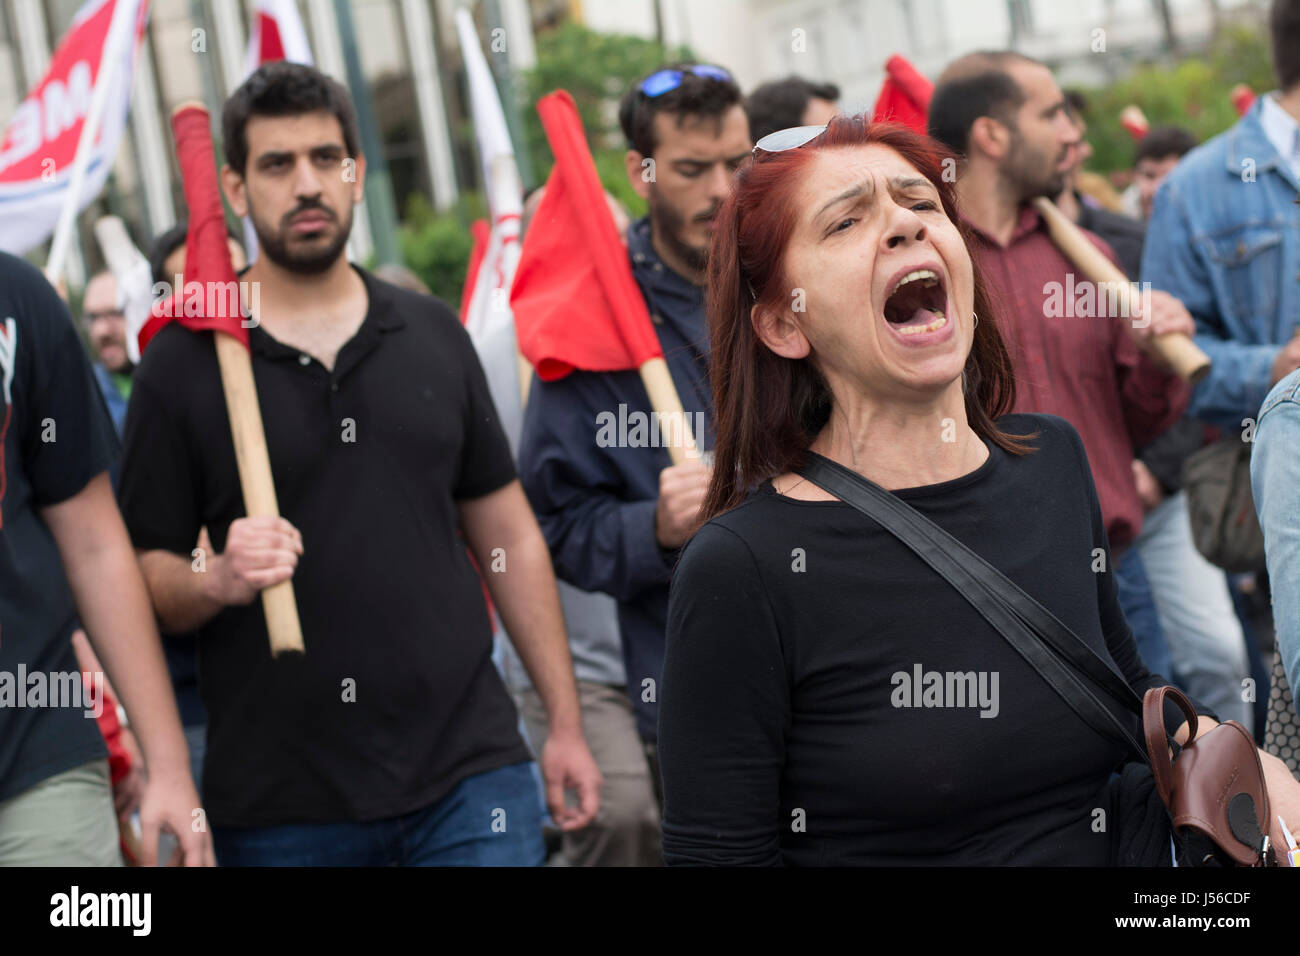 Athens, Greece. 17th May, 2017. Strikers march holding banners and shouting slogans against the government and further upcoming austerity measures. Thousands took to the streets participating in a 24 hour general strike organized by private and public sector unions, protesting against the recent fiscal deal between the government and the country’s creditors. © Nikolas Georgiou / Alamy Live News Stock Photo